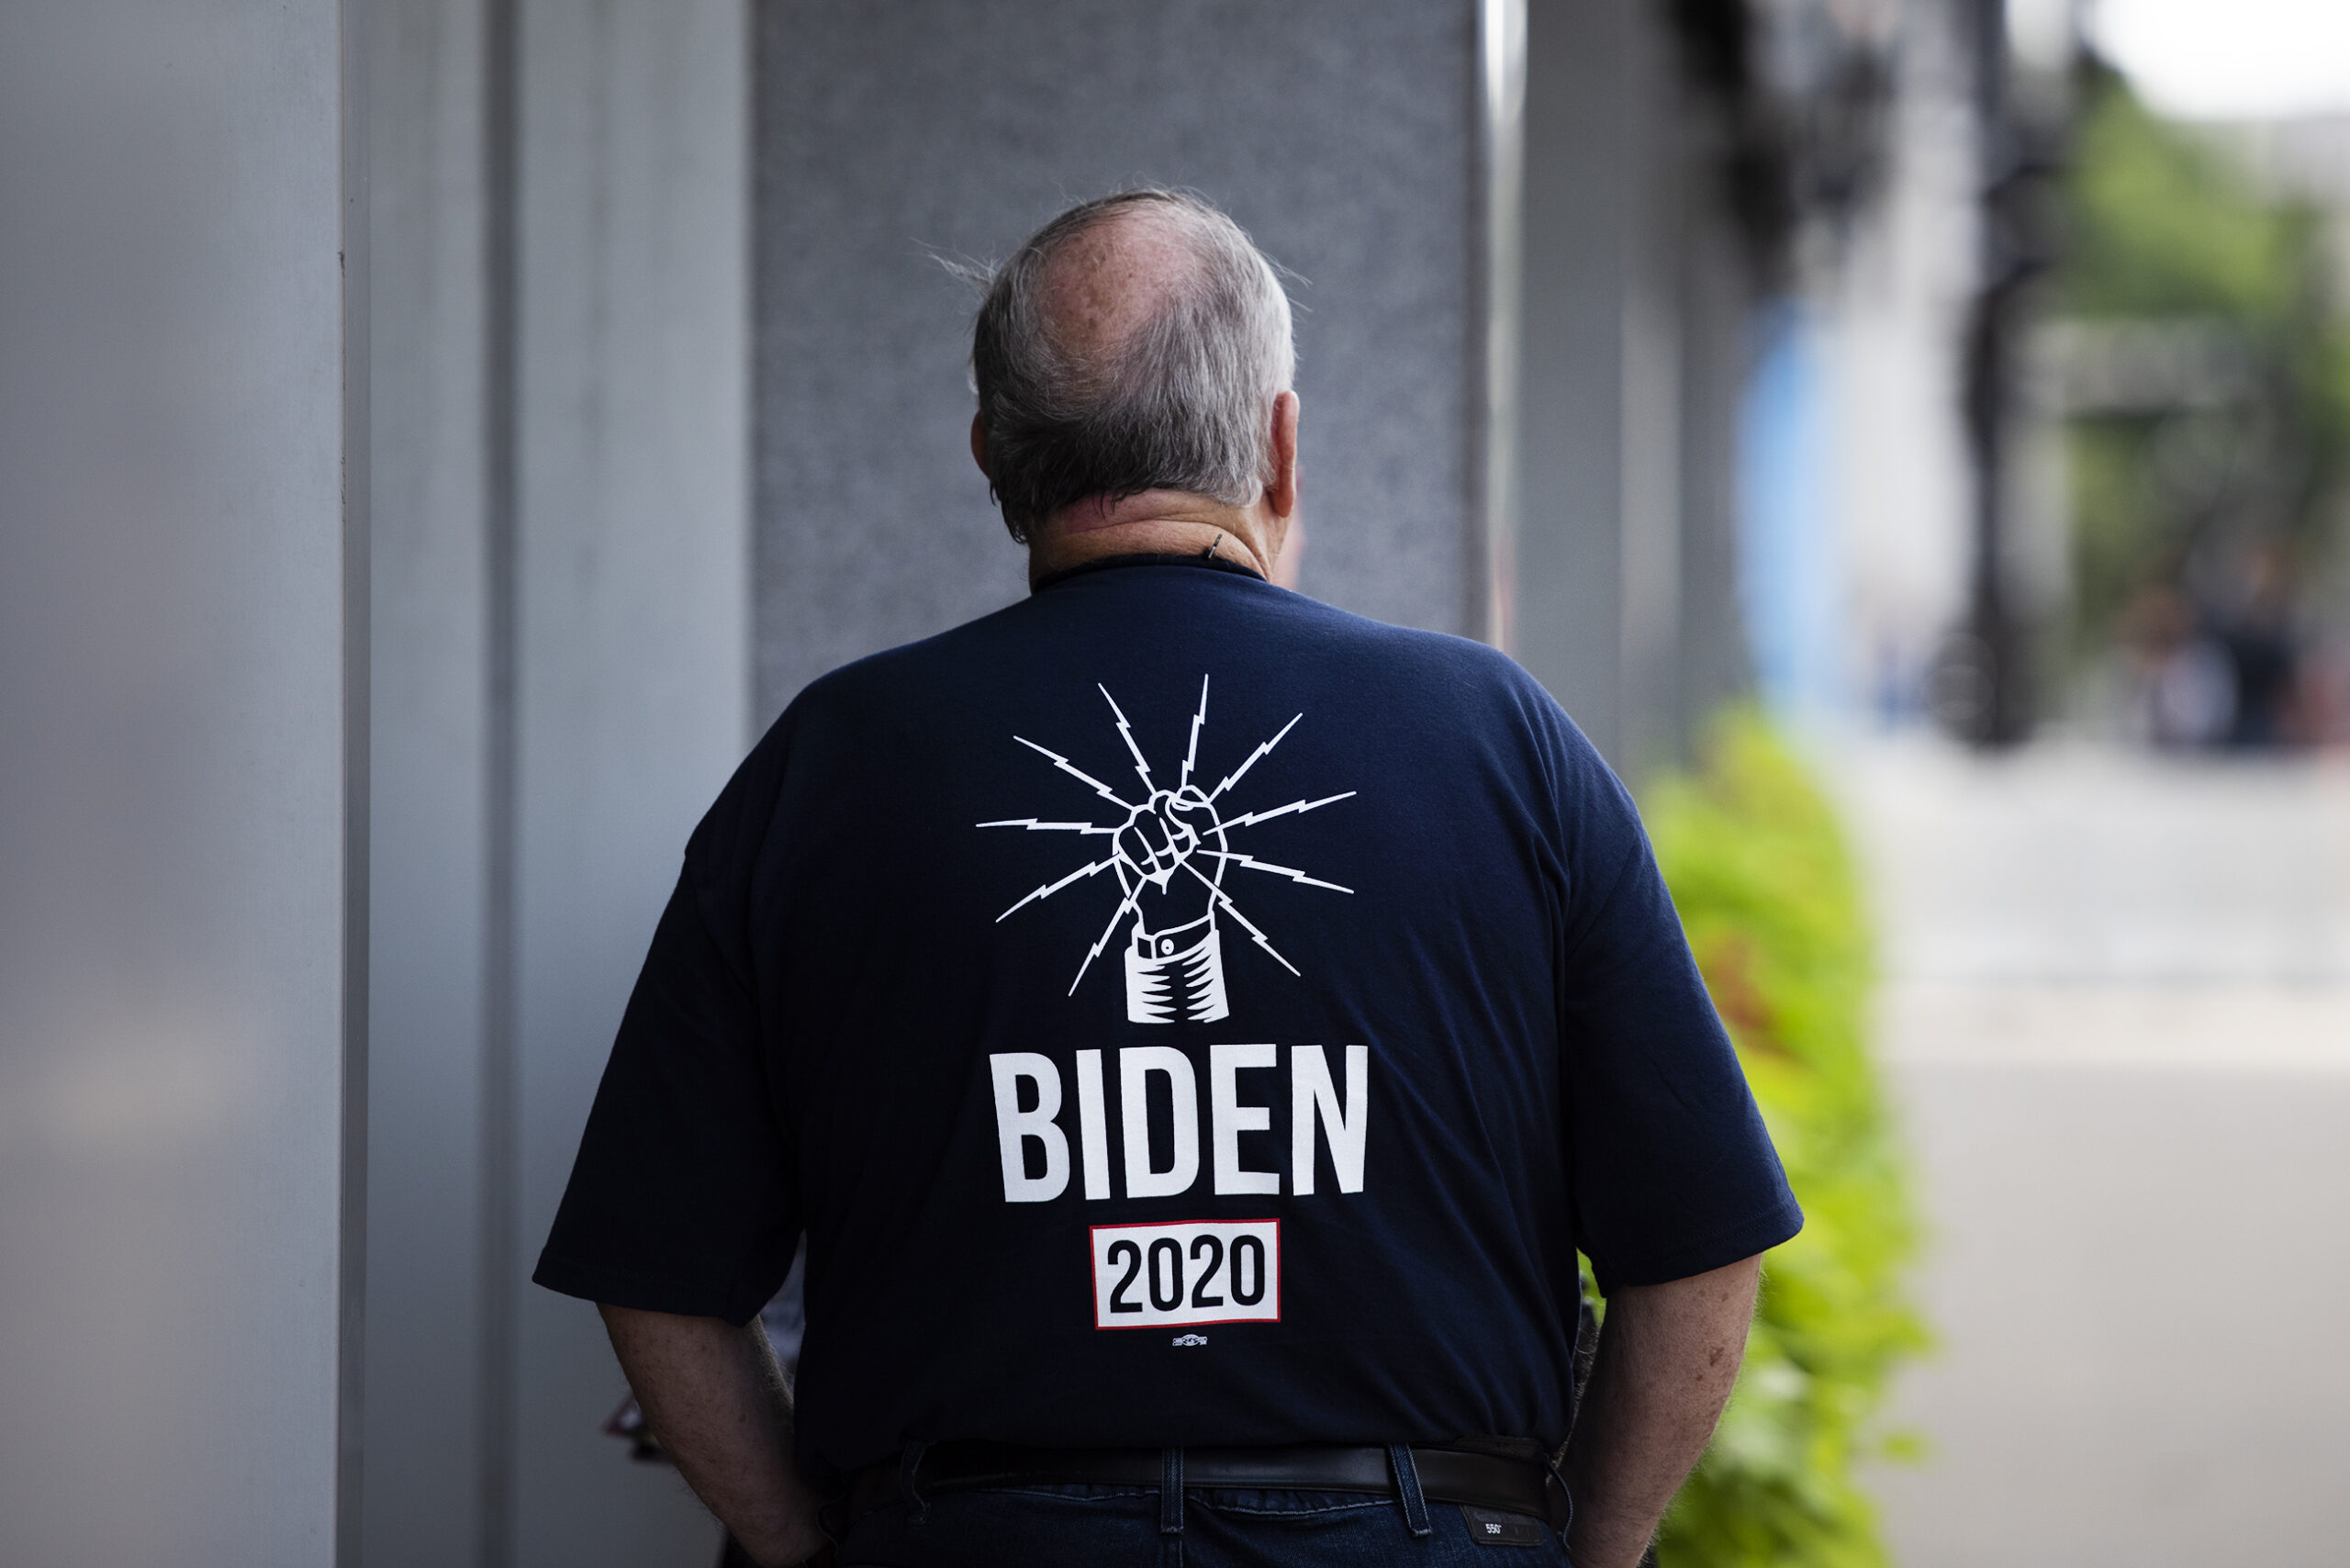 a man seen from behind has a shirt that says 